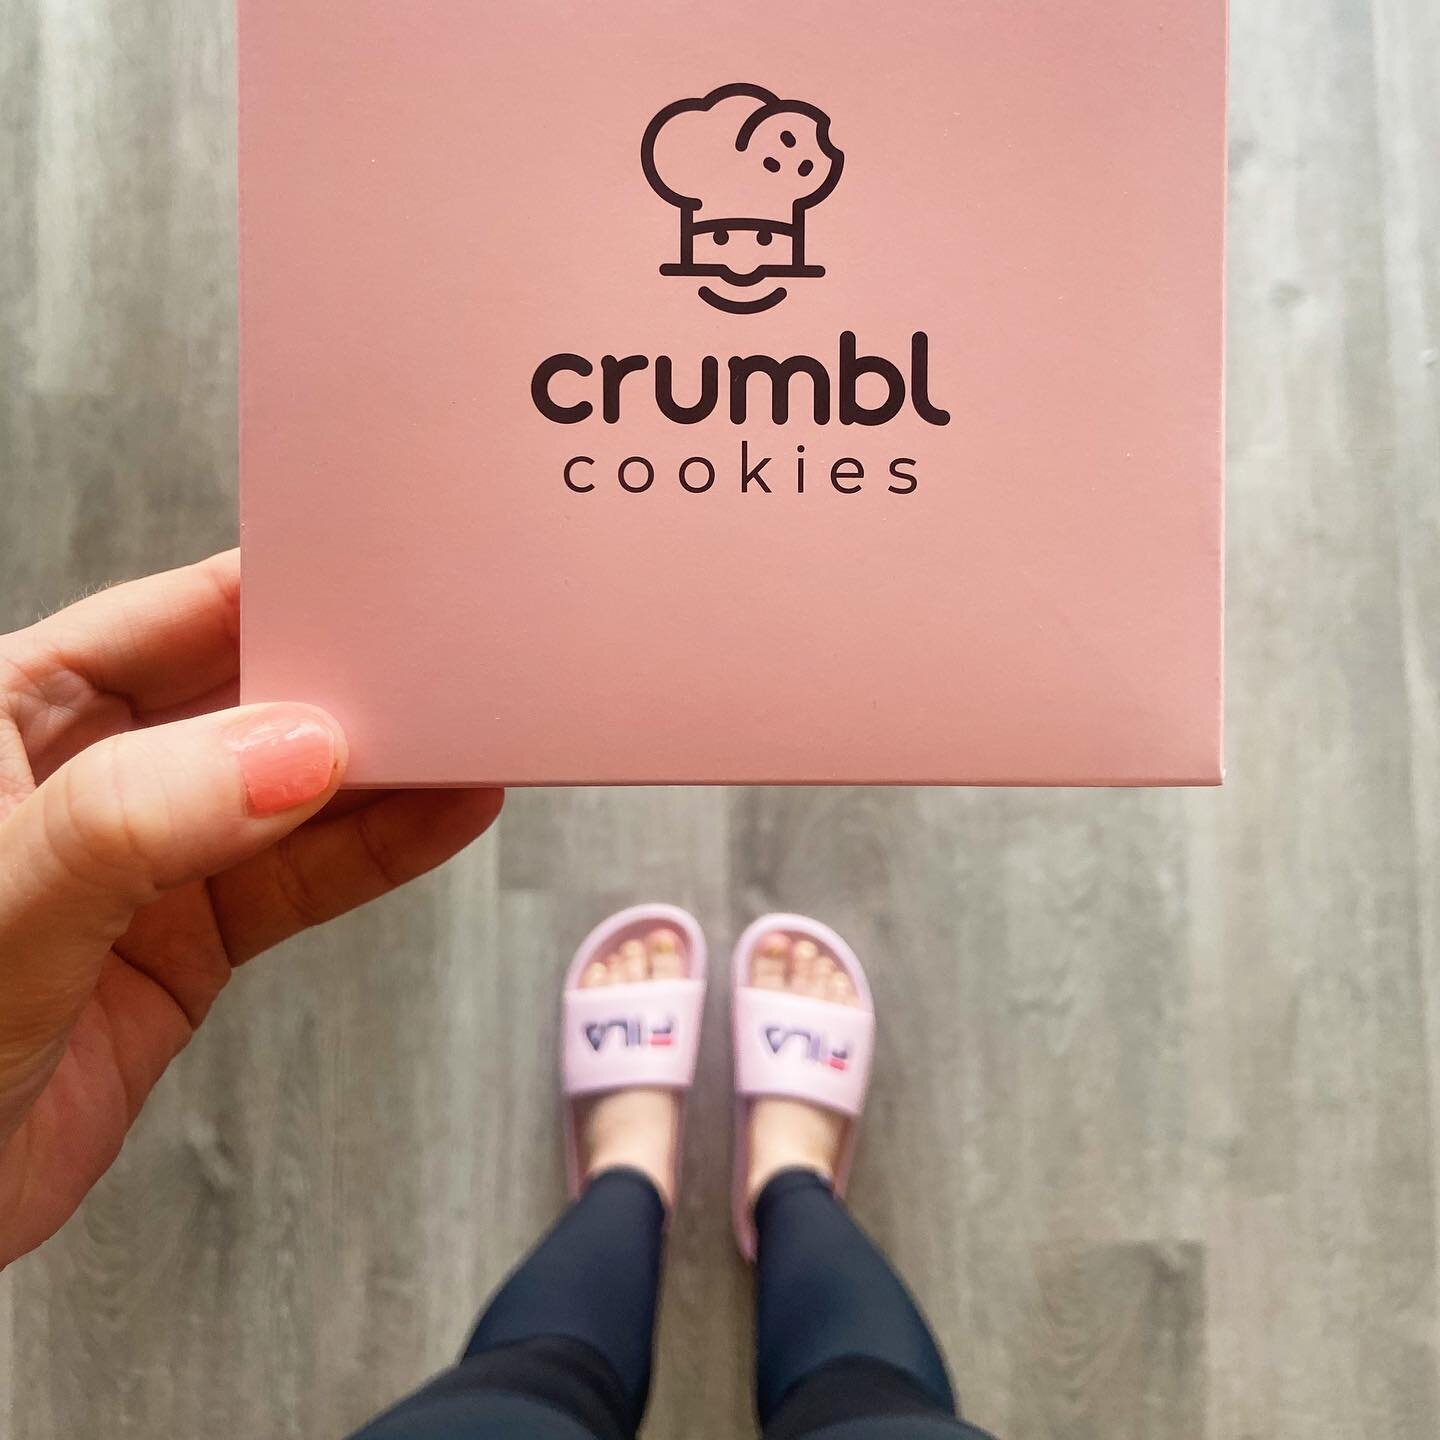 Greys Anatomy is back tonight &amp; the pink frosted sugar cookie from @crumblcookies is life